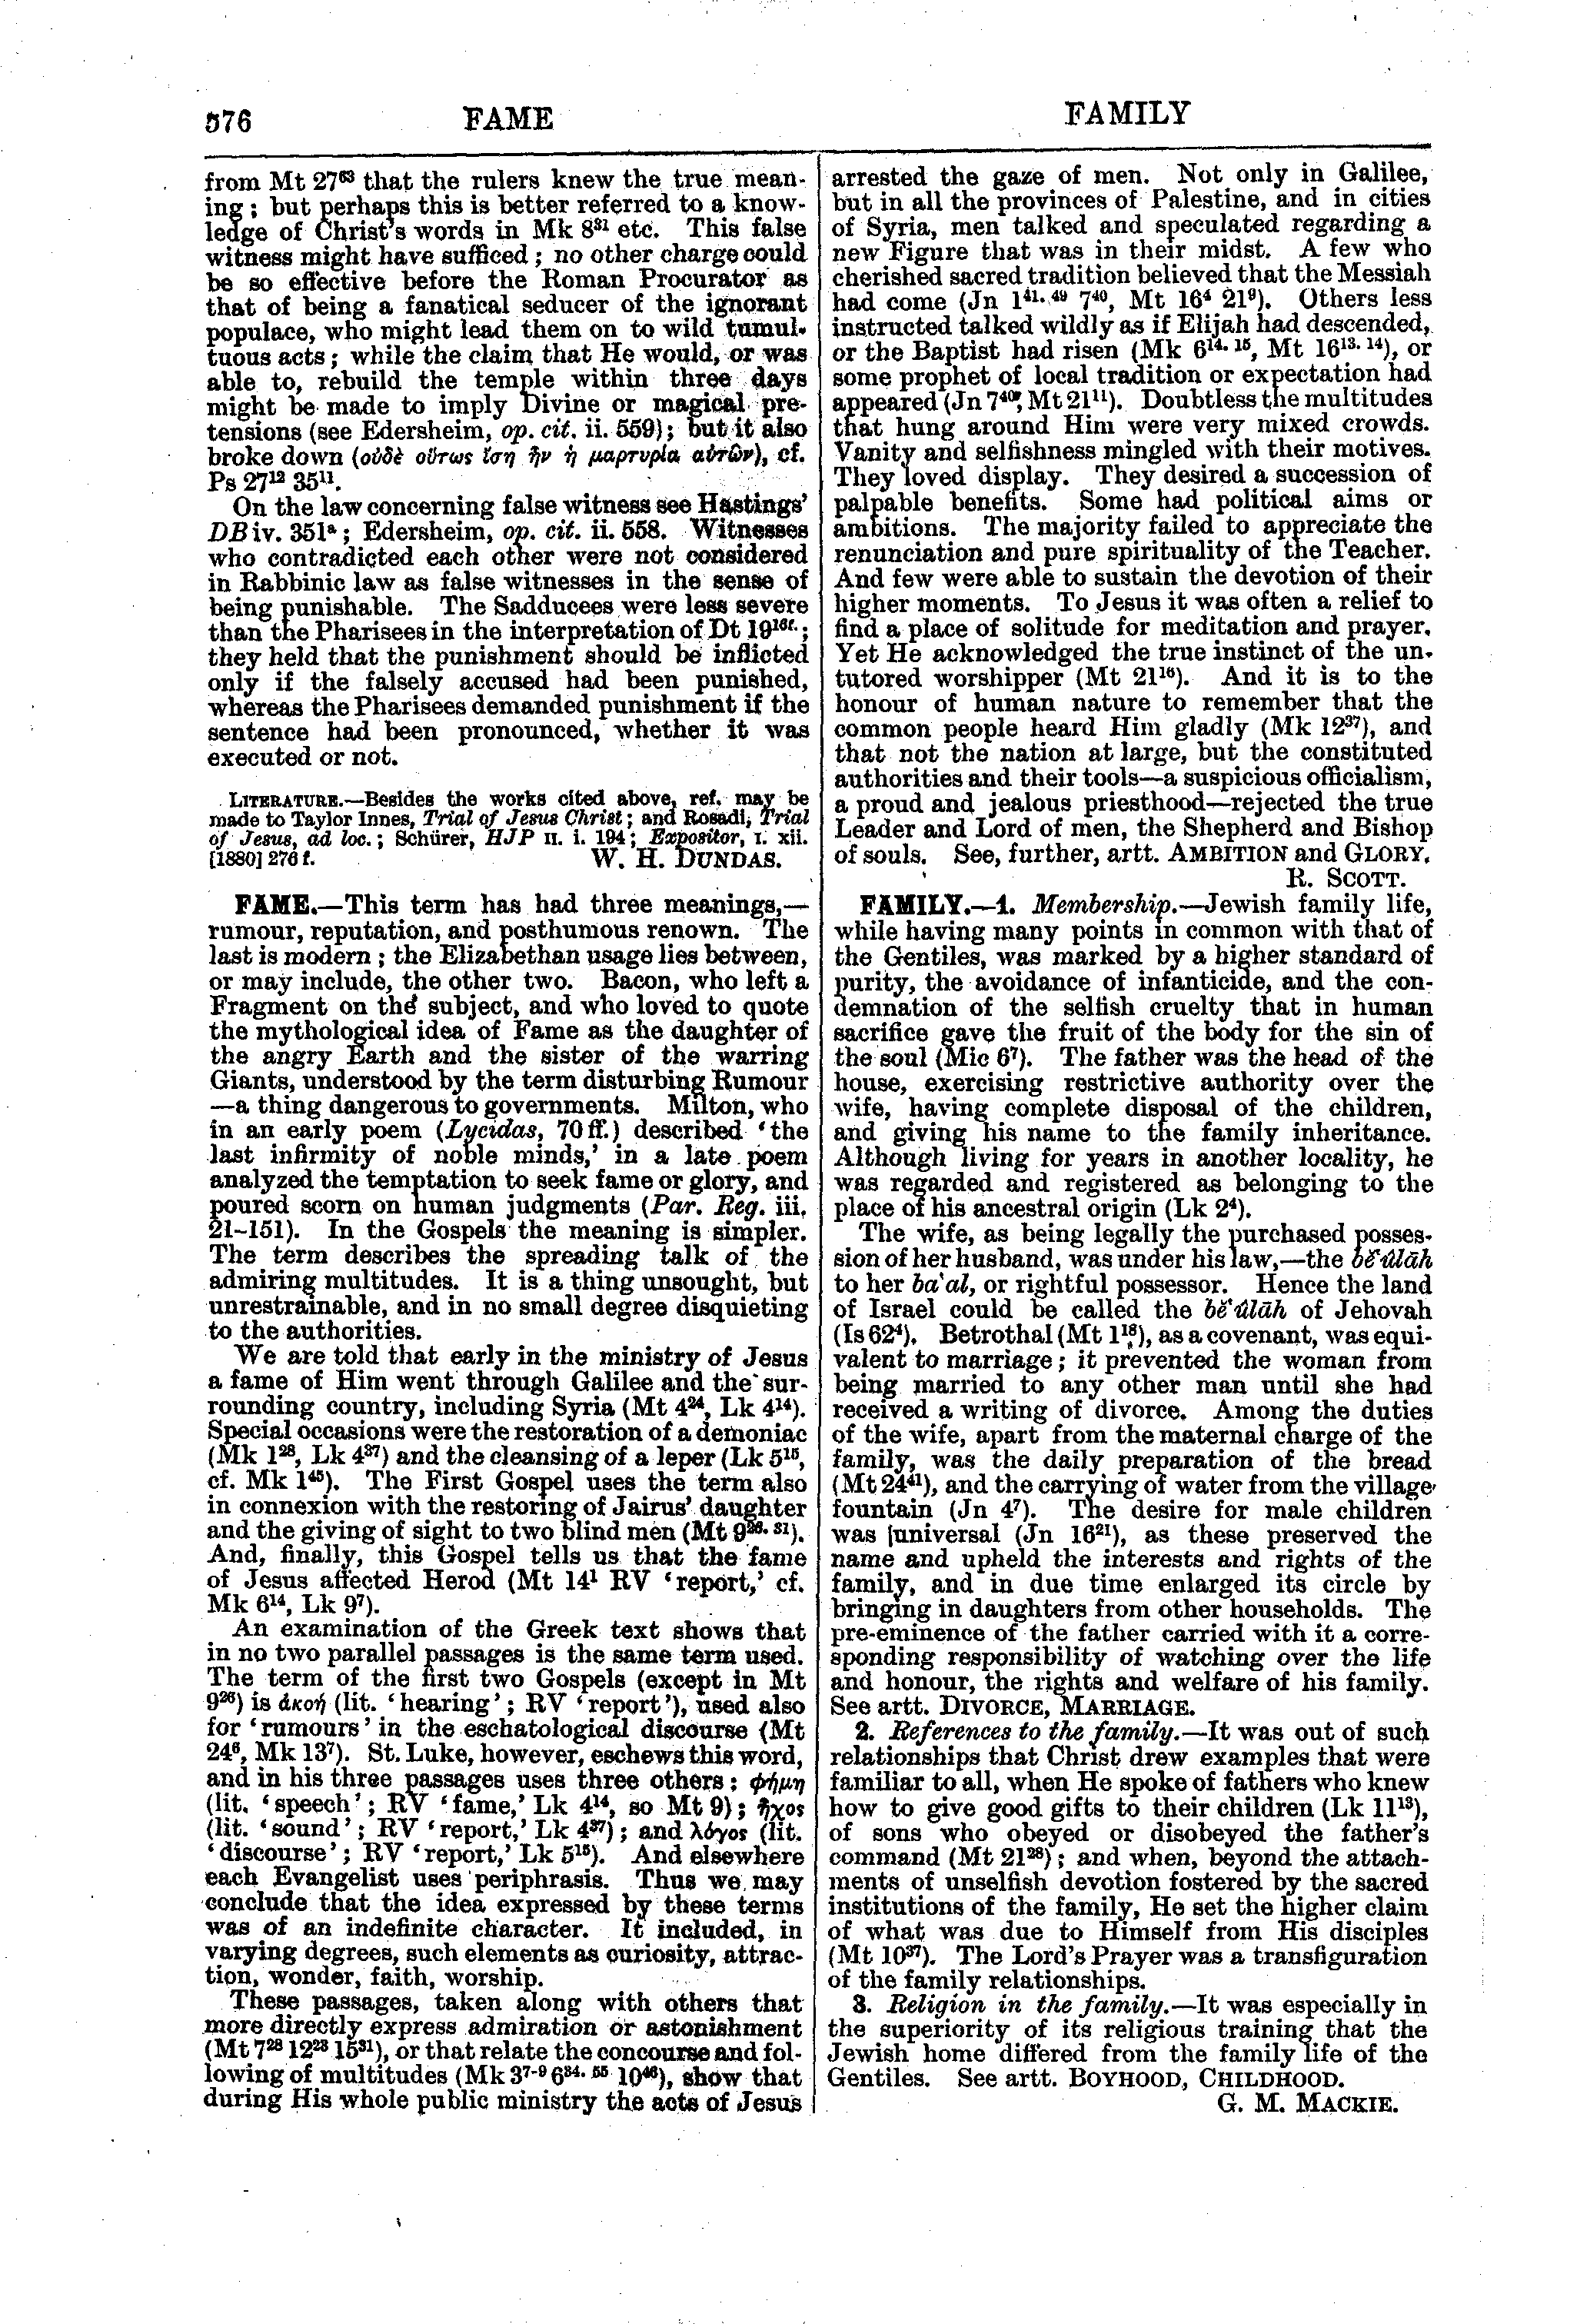 Image of page 576